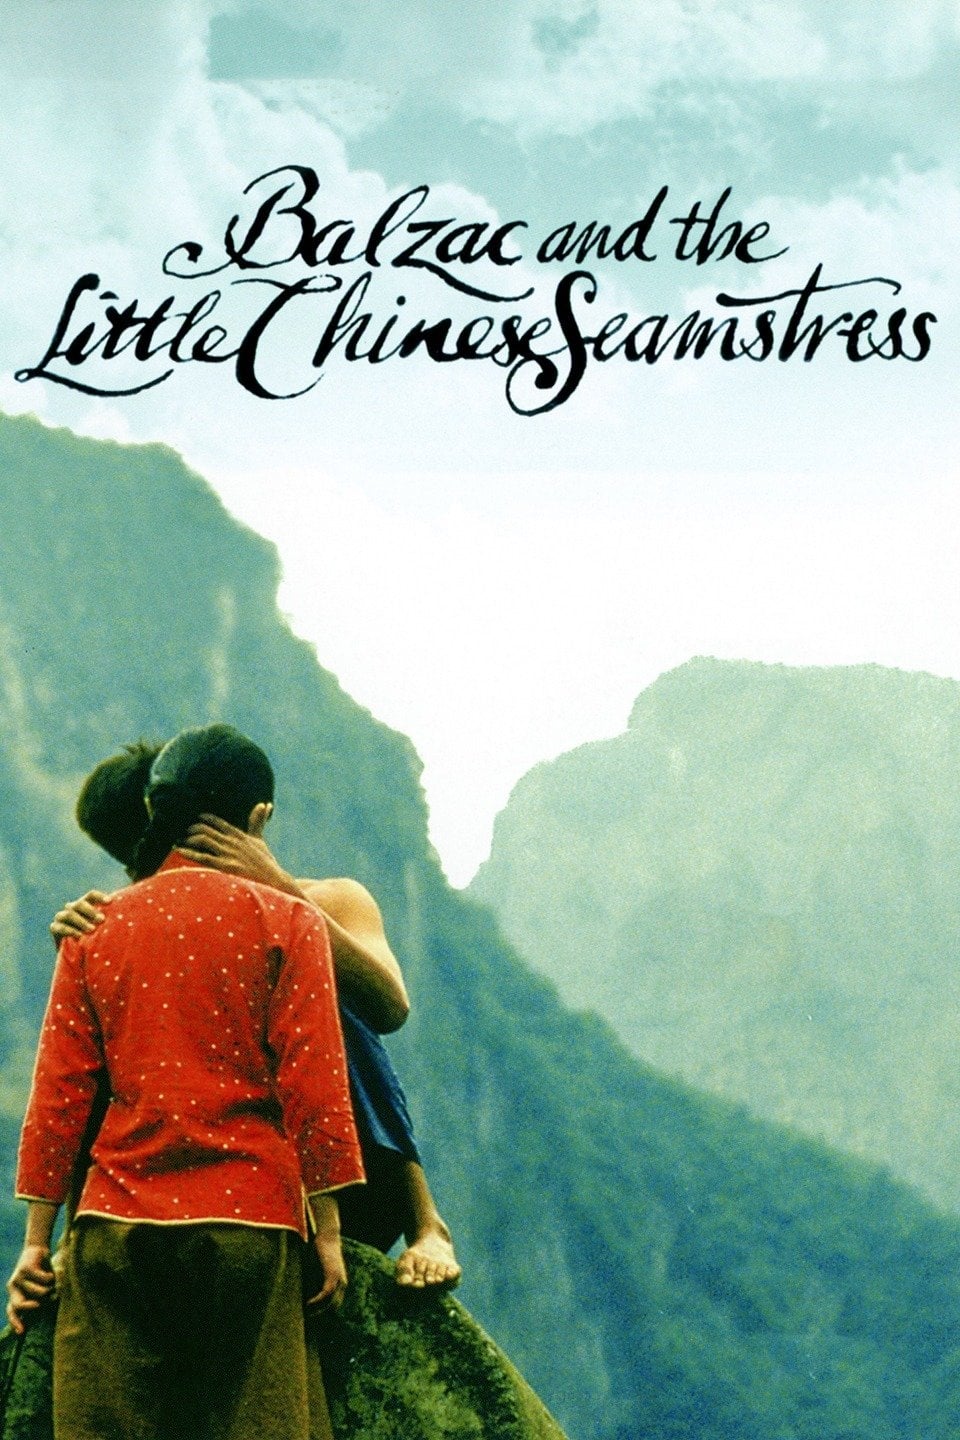 Balzac and the Little Chinese Seamstress (2002)